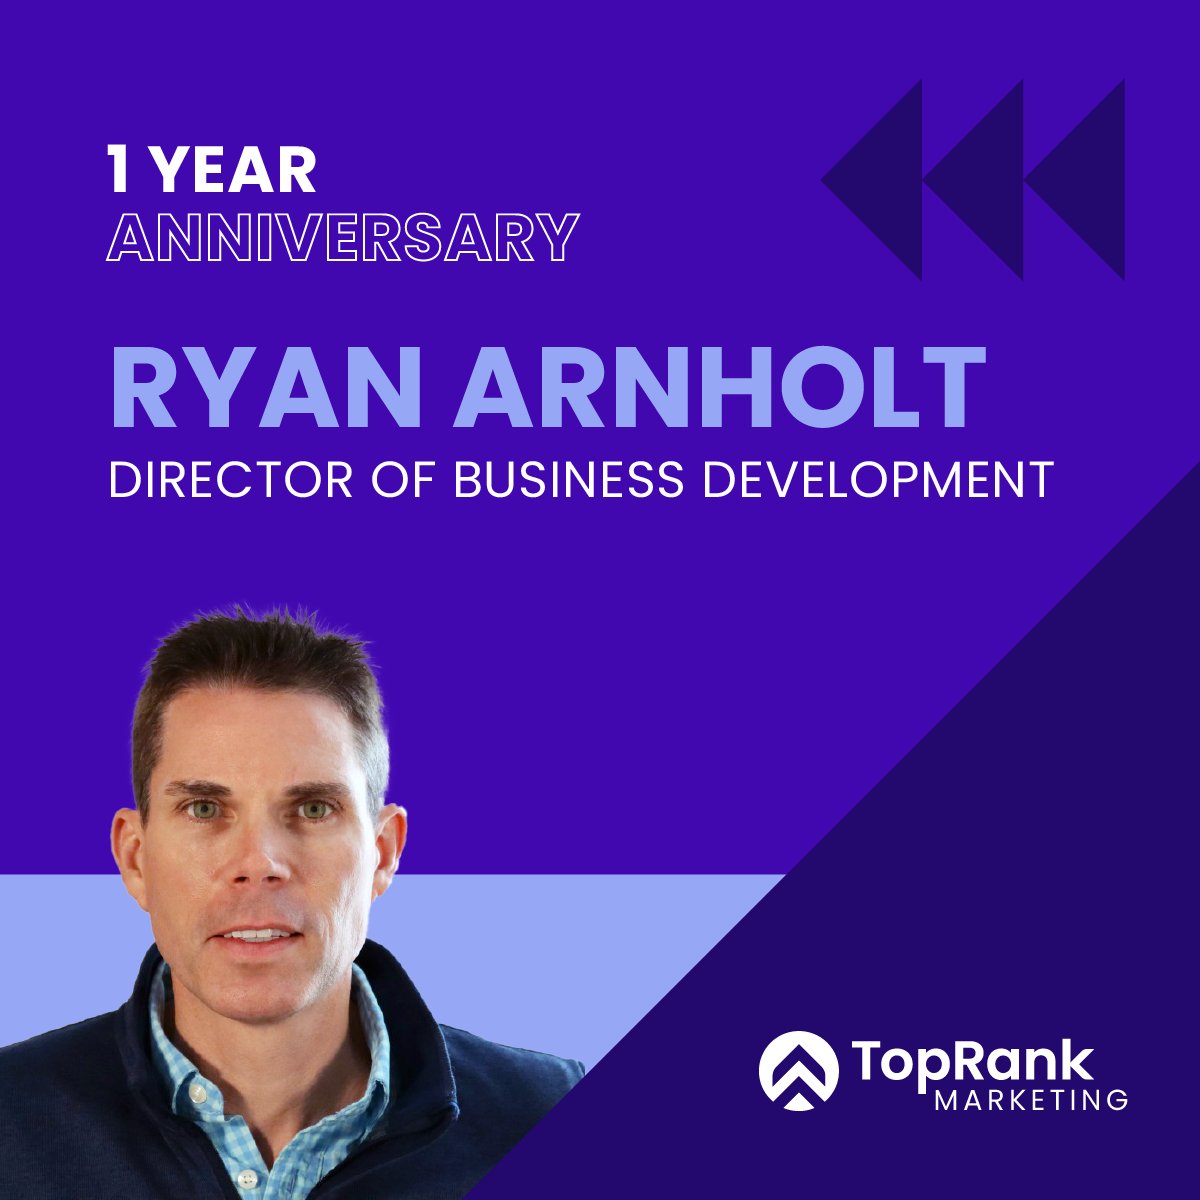 Happy 1st work anniversary to our biz dev king, @ArbenAngstrom! 🎉 His highlight of the year? Learning from content and influencer marketing experts who are leaders in their field. Thanks for all you do! 🎊 #WorkAnniversary #B2BMarketing #Milestones